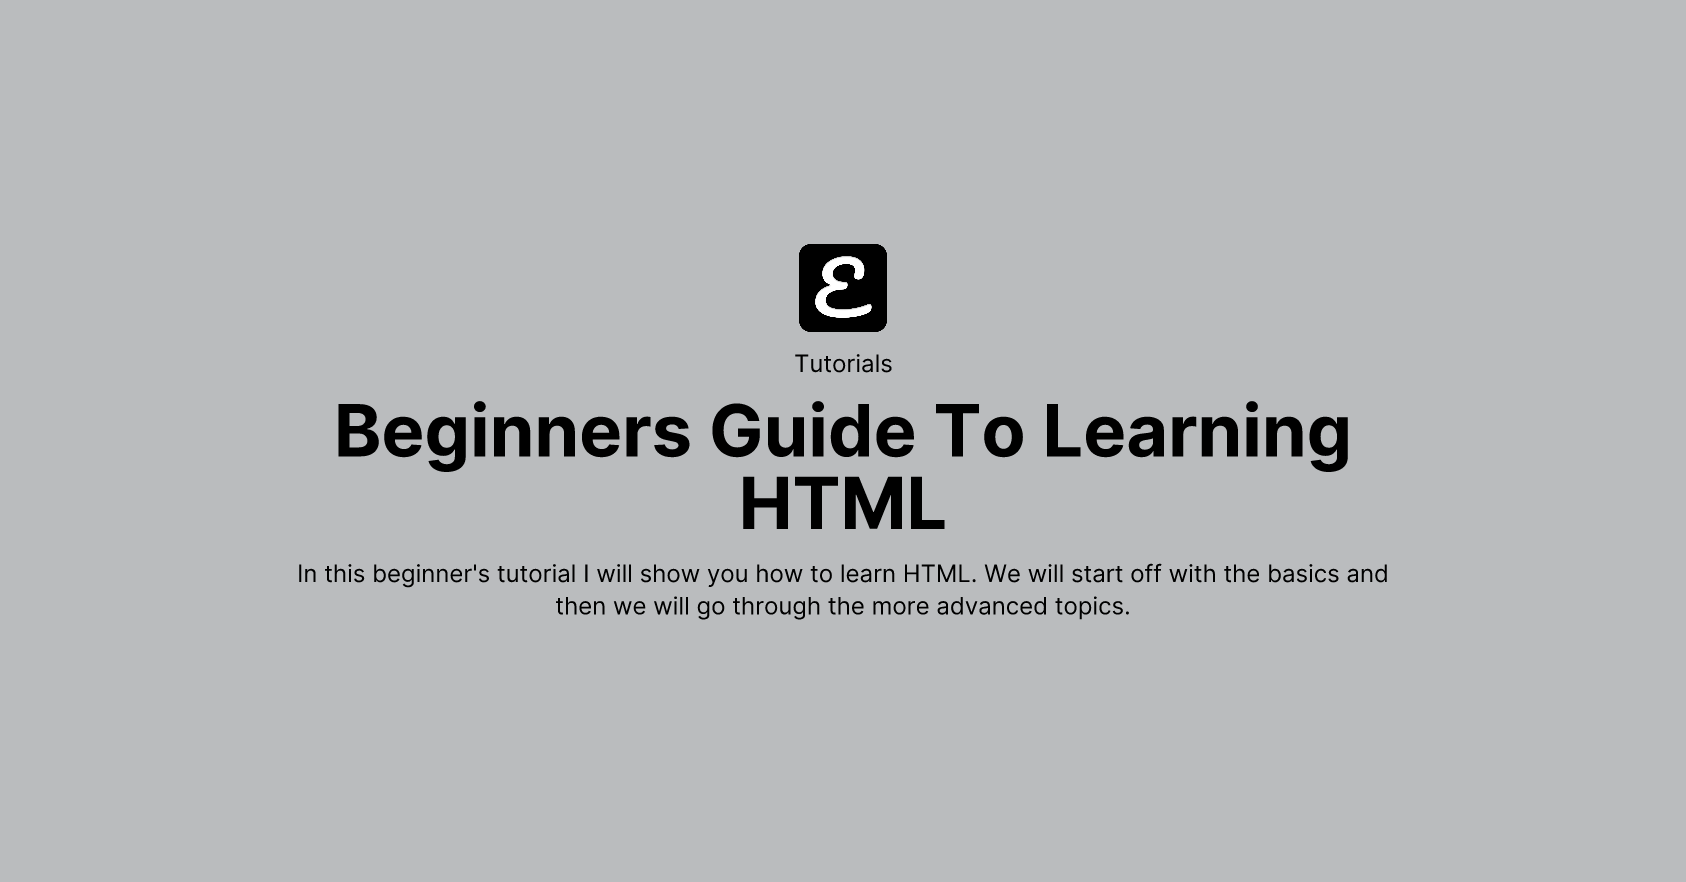 Beginners Guide To Learning HTML by Eric David Smith